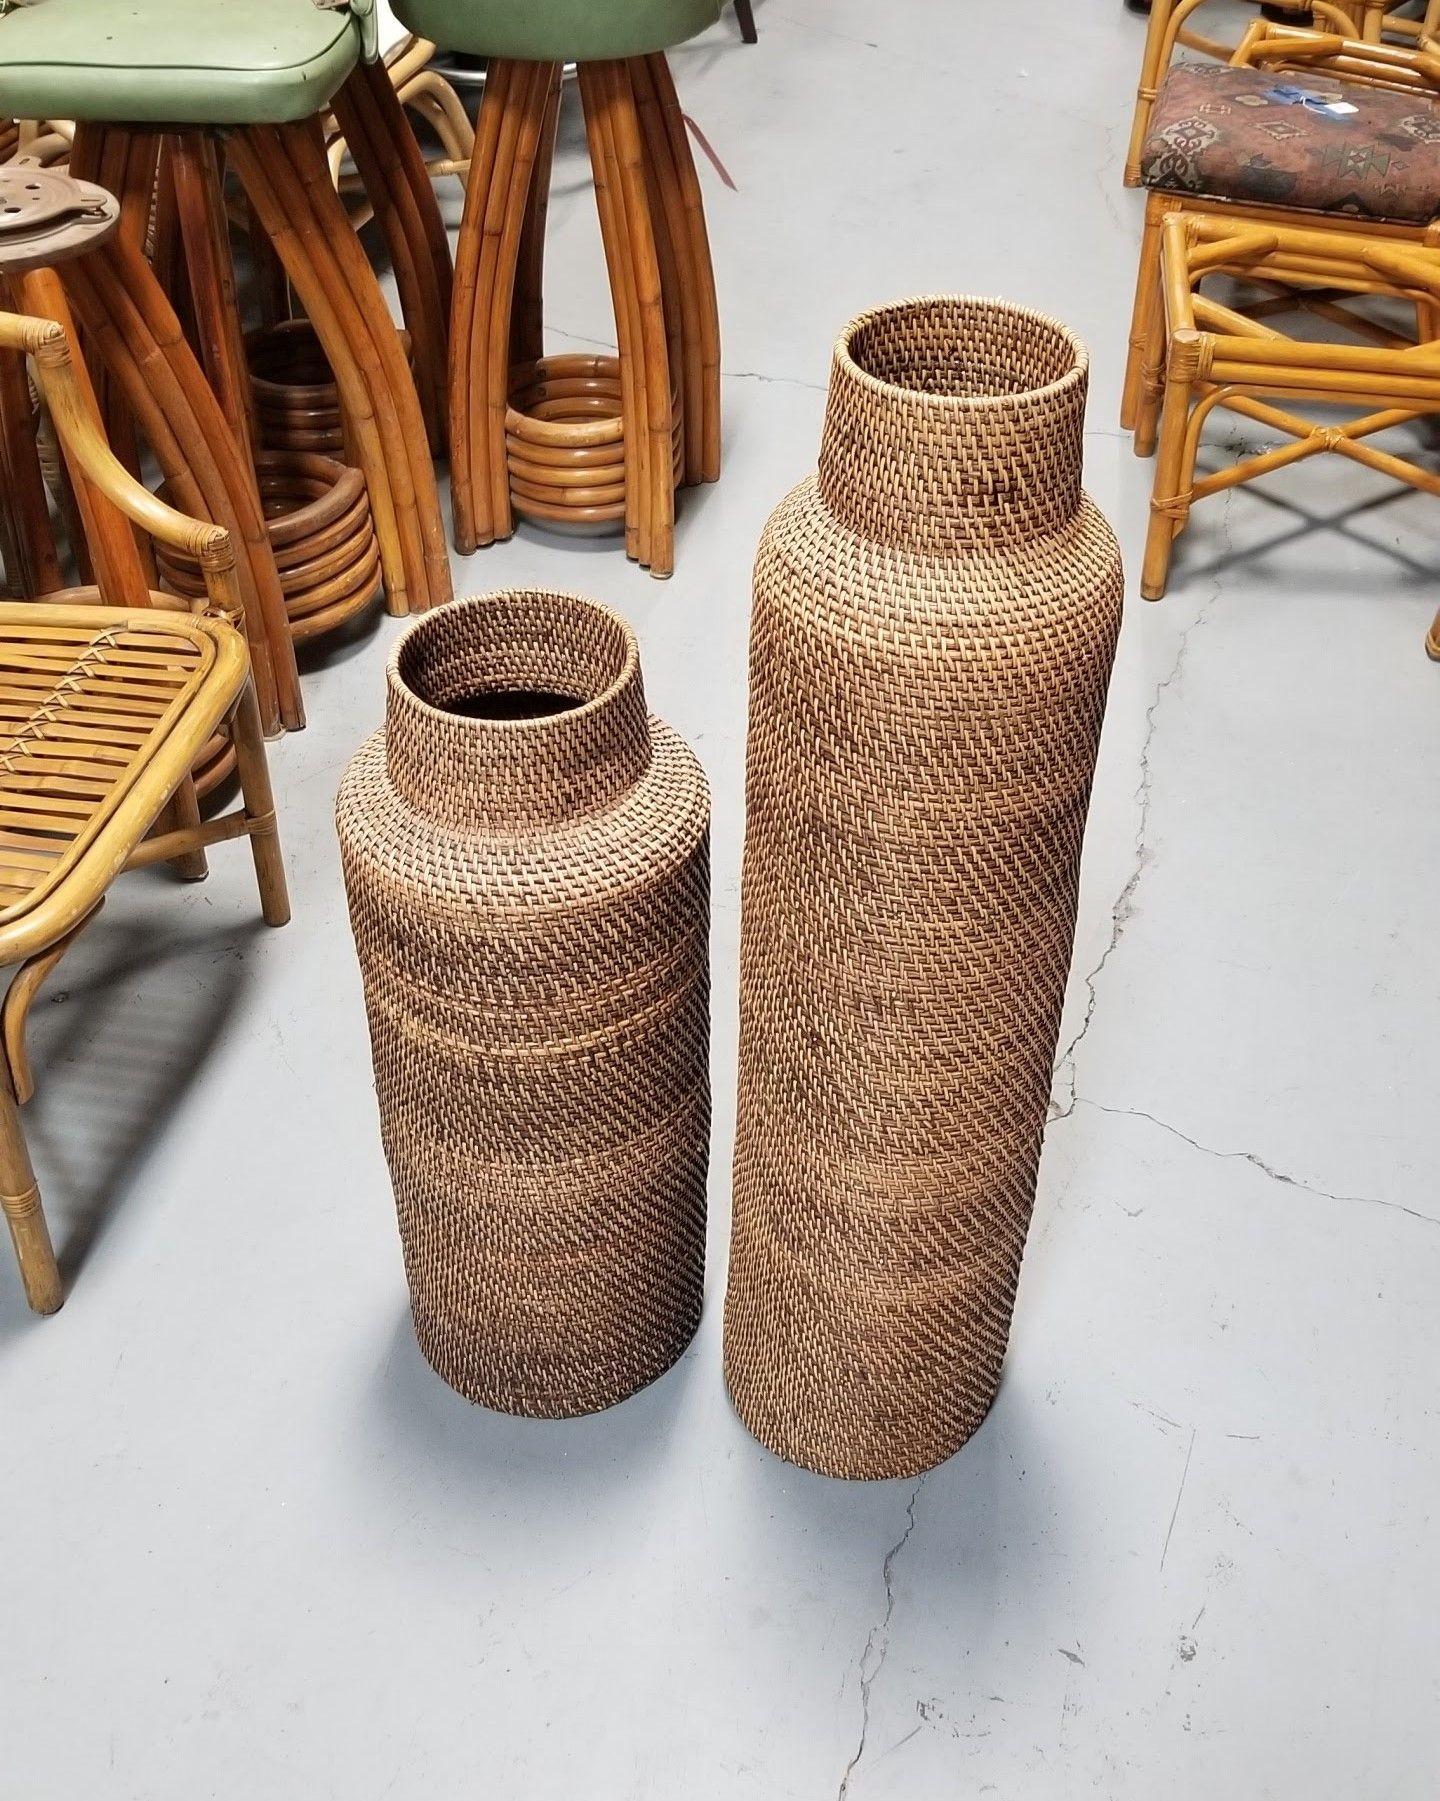 Large pair of two Gabriella Crespi-styled decorative floor vases made from stacked reed pencil rattan rings with wicker weave. Perfect for holding dried plant arrangements or simply standing on its own.

Dimensions:

Smaller Vase: 29